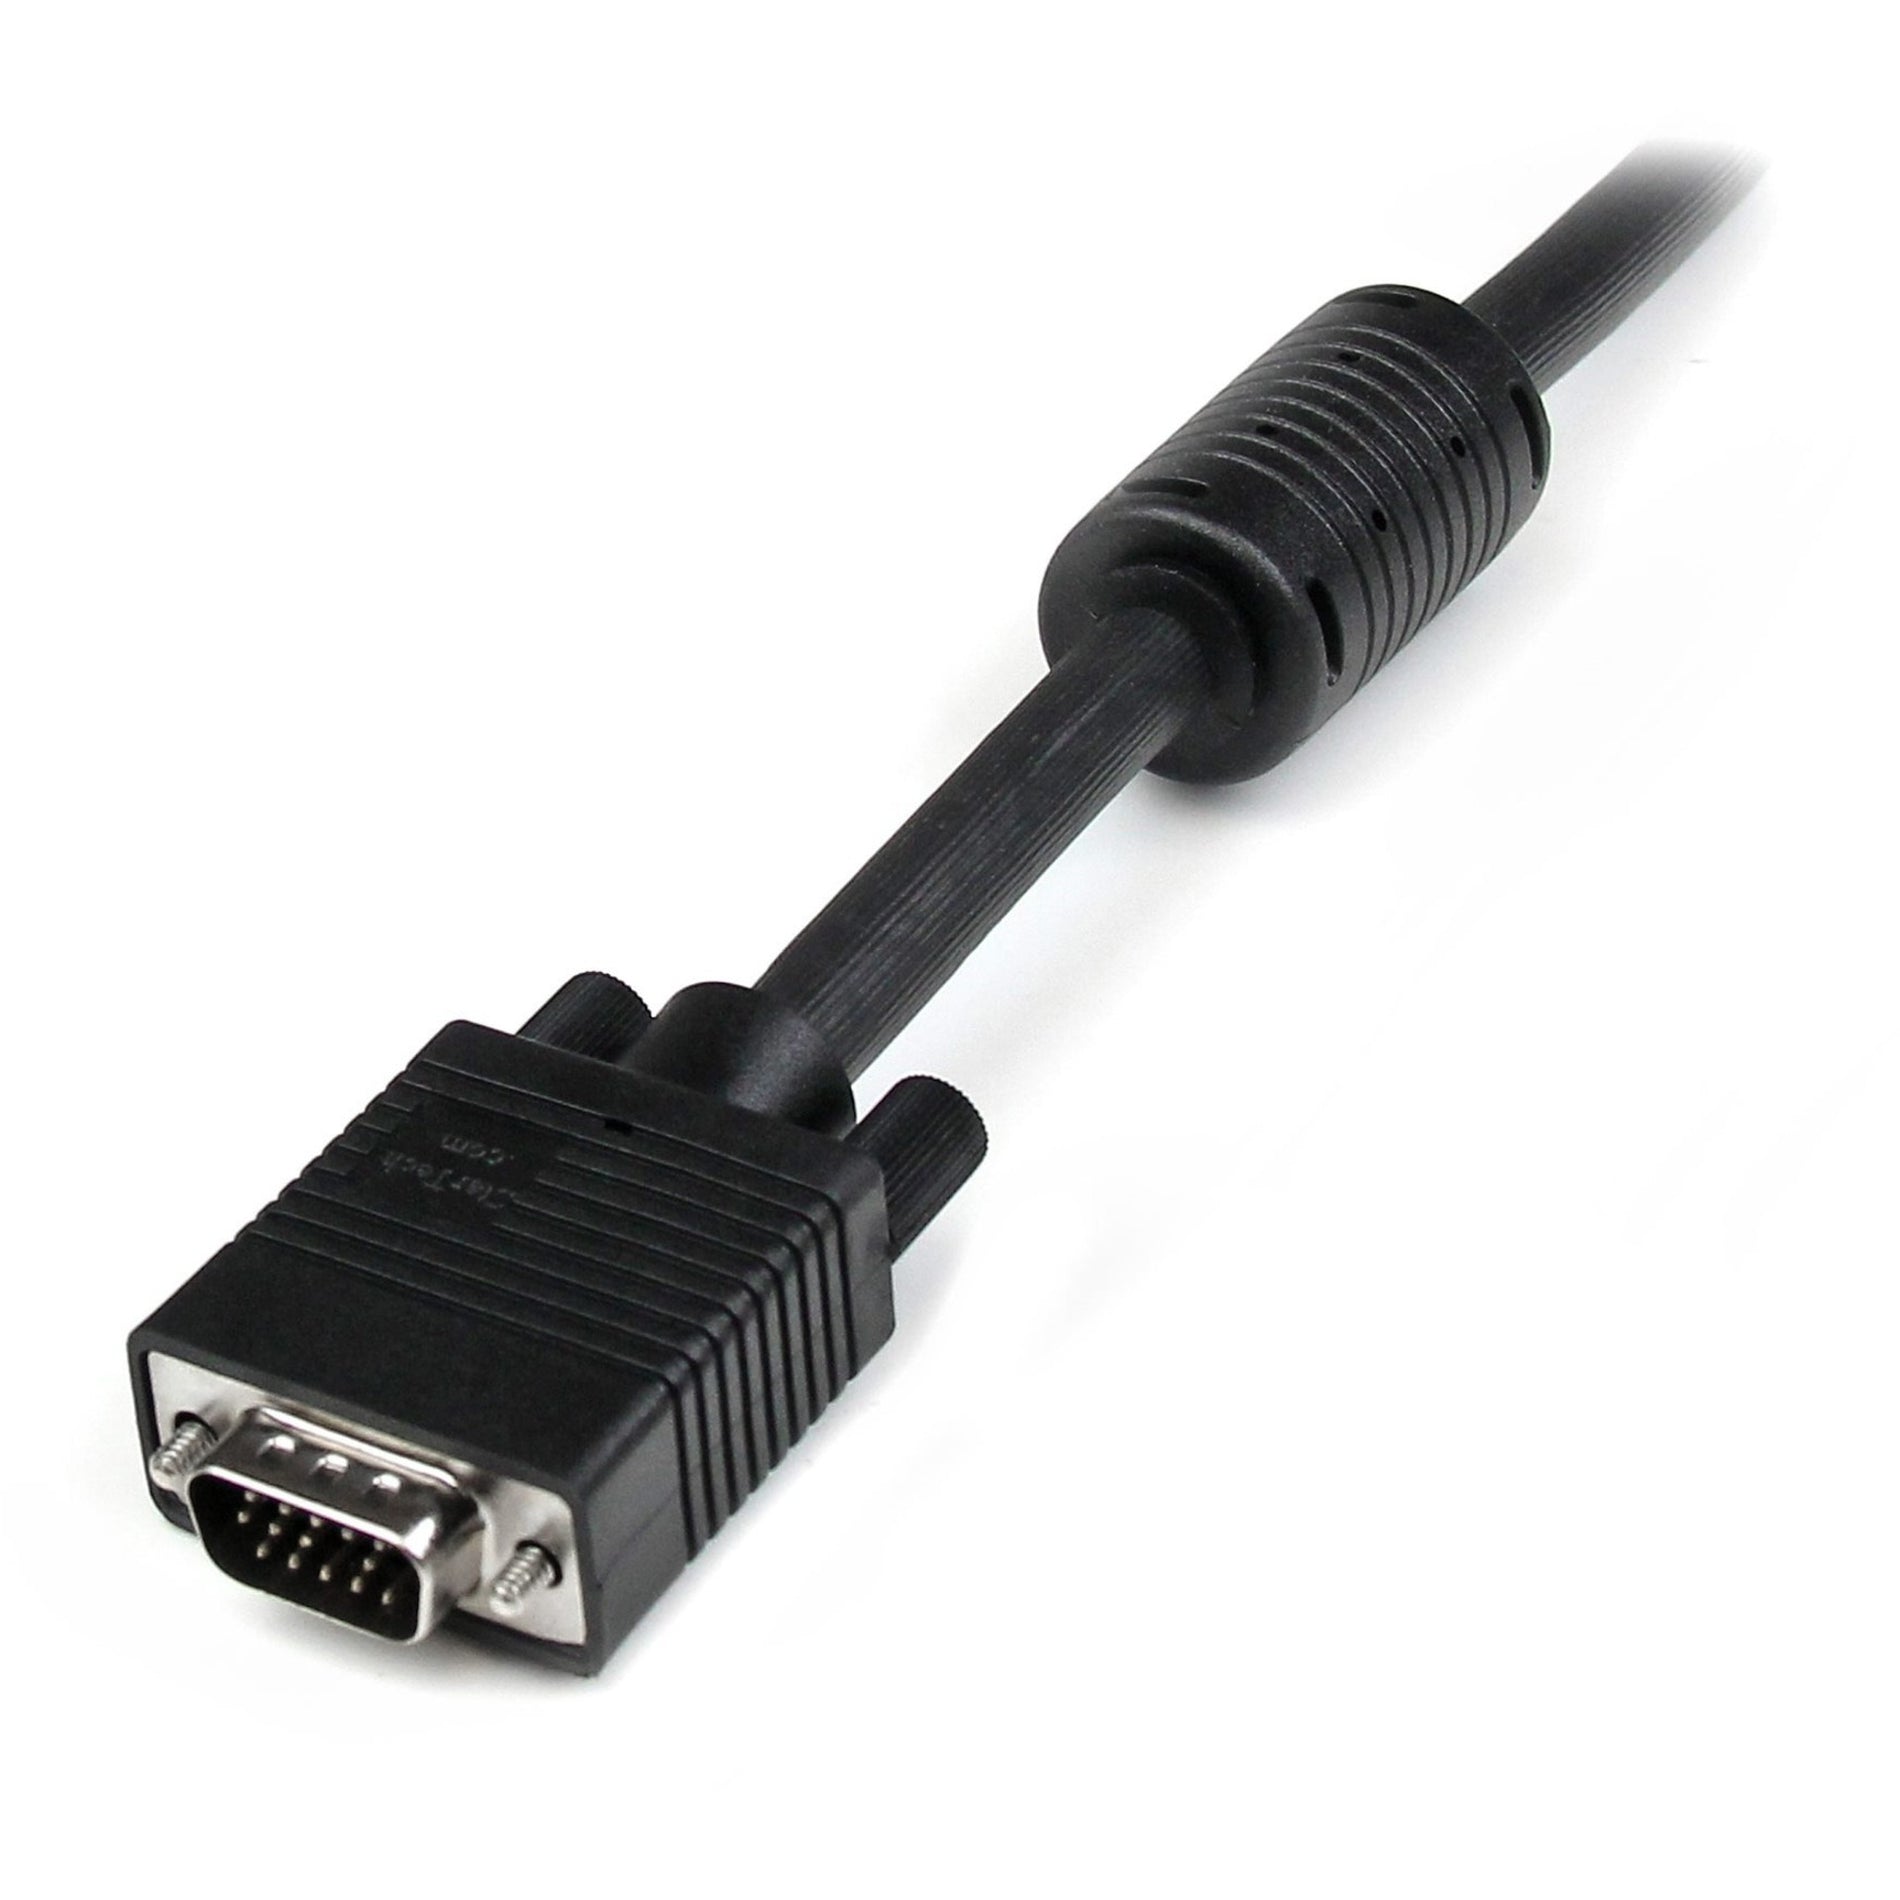 StarTech.com MXT105MMHQ 15 ft Coax High Resolution Monitor VGA Cable - HD15 Male/Male, Crystal Clear Display, EMI Protection